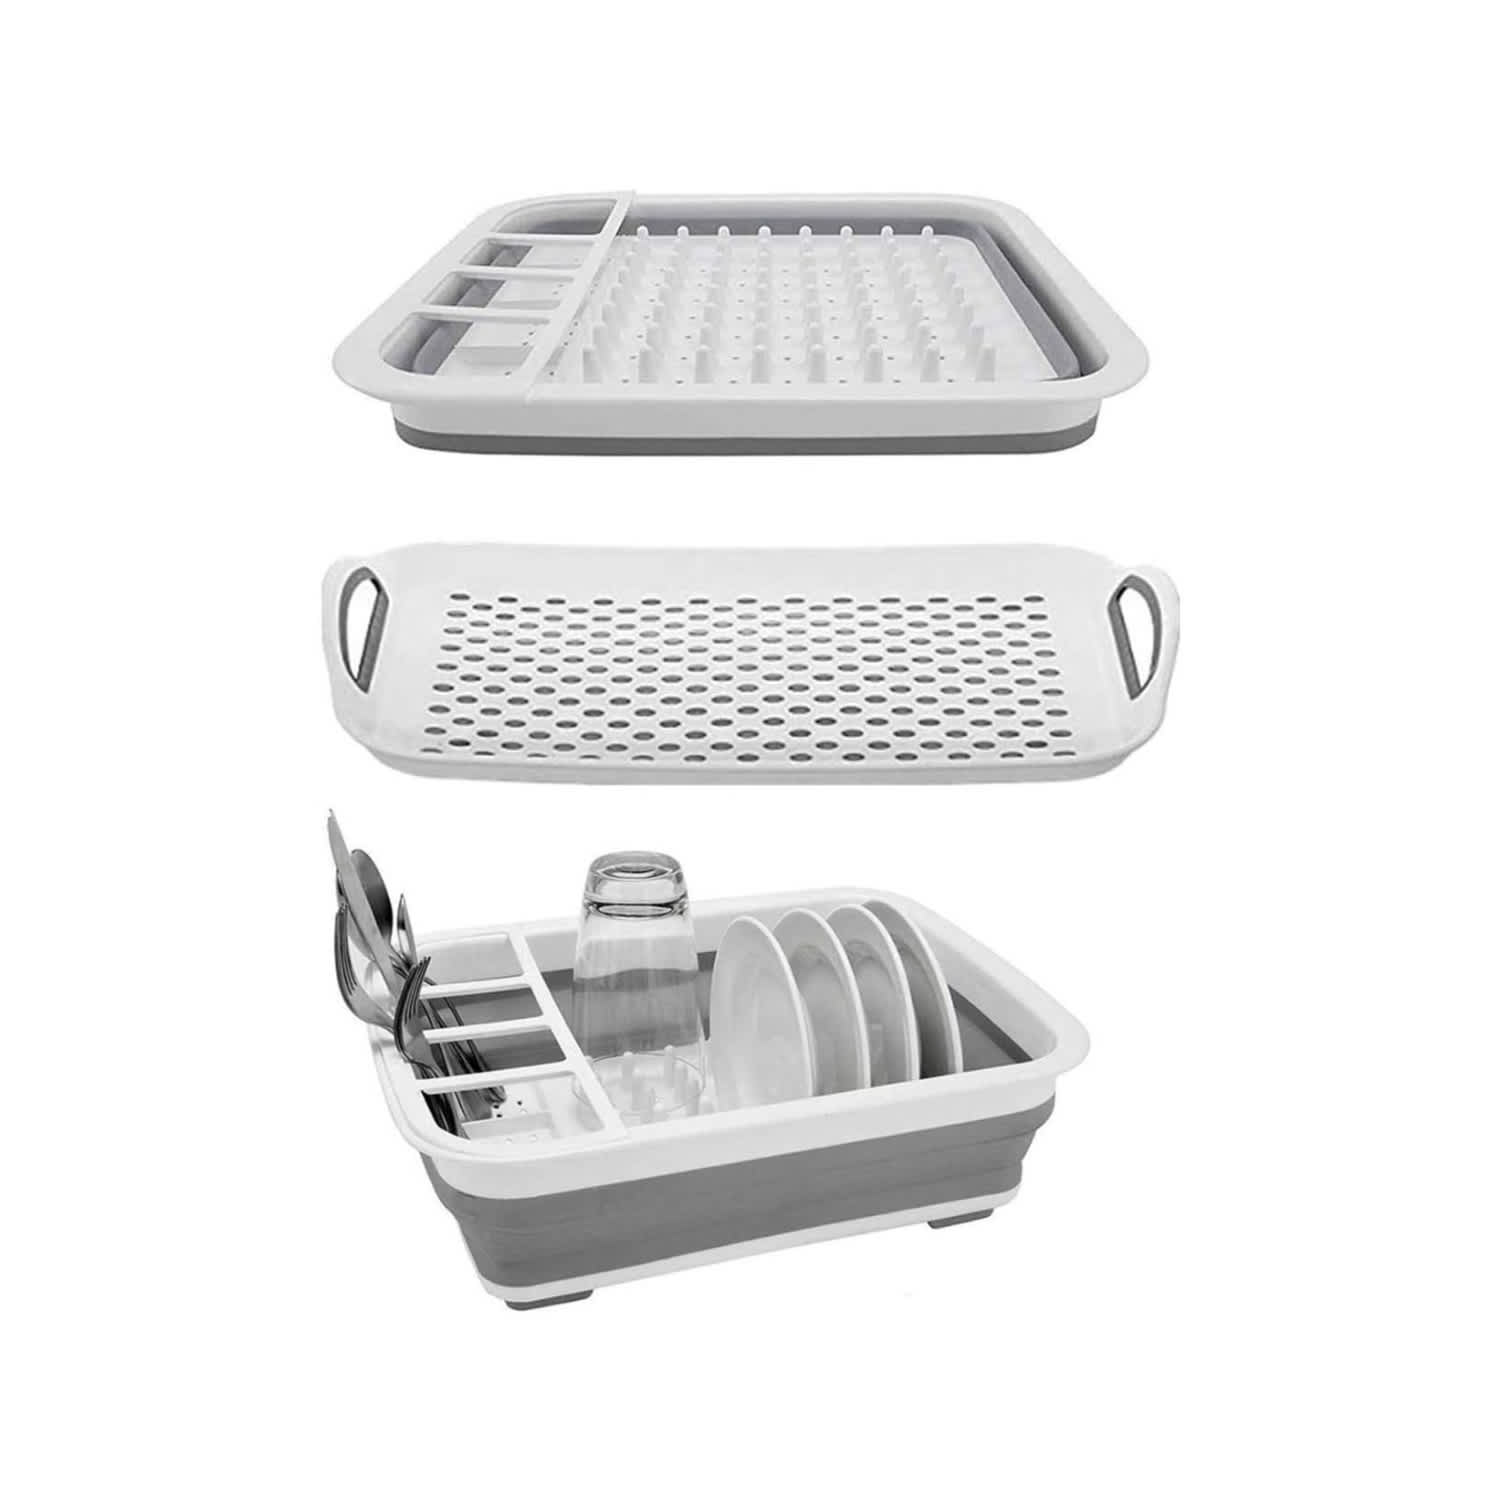 https://cdn.apartmenttherapy.info/image/upload/v1695312019/k/shopping/2023-09/dish-rack-to-prevent-counter-clutter/ahyuan-collapsible-dish-rack.jpg